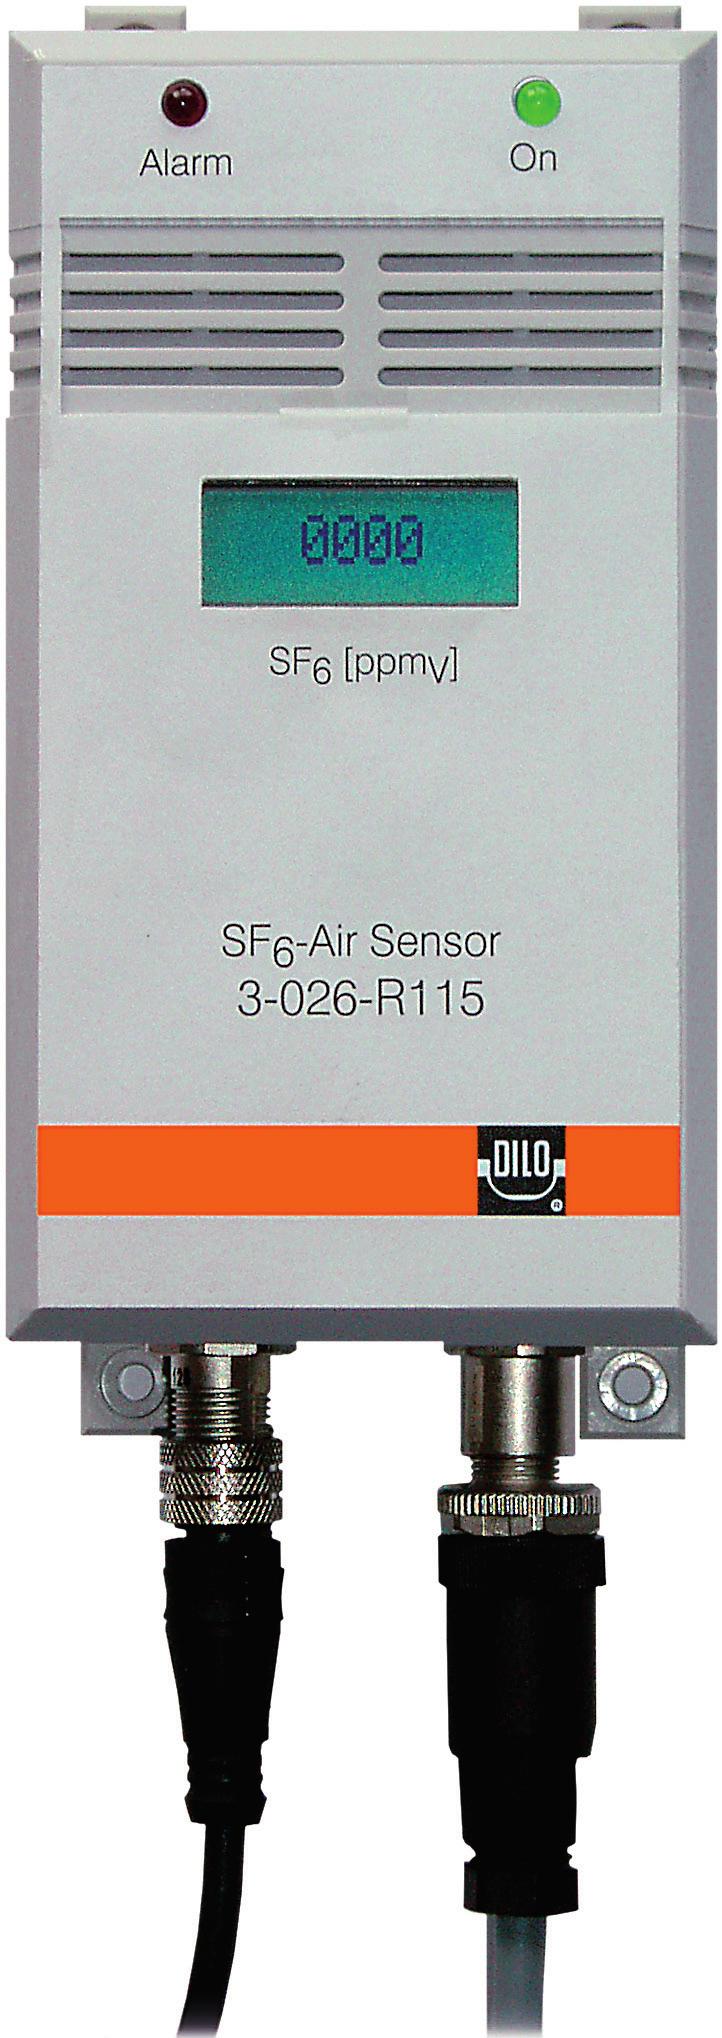 Measuring devices Room monitoring devices For monitoring the air of indoor plant in permanent operation 3-026-R115 Air Sensor The device even detects smallest concentrations and displays the current